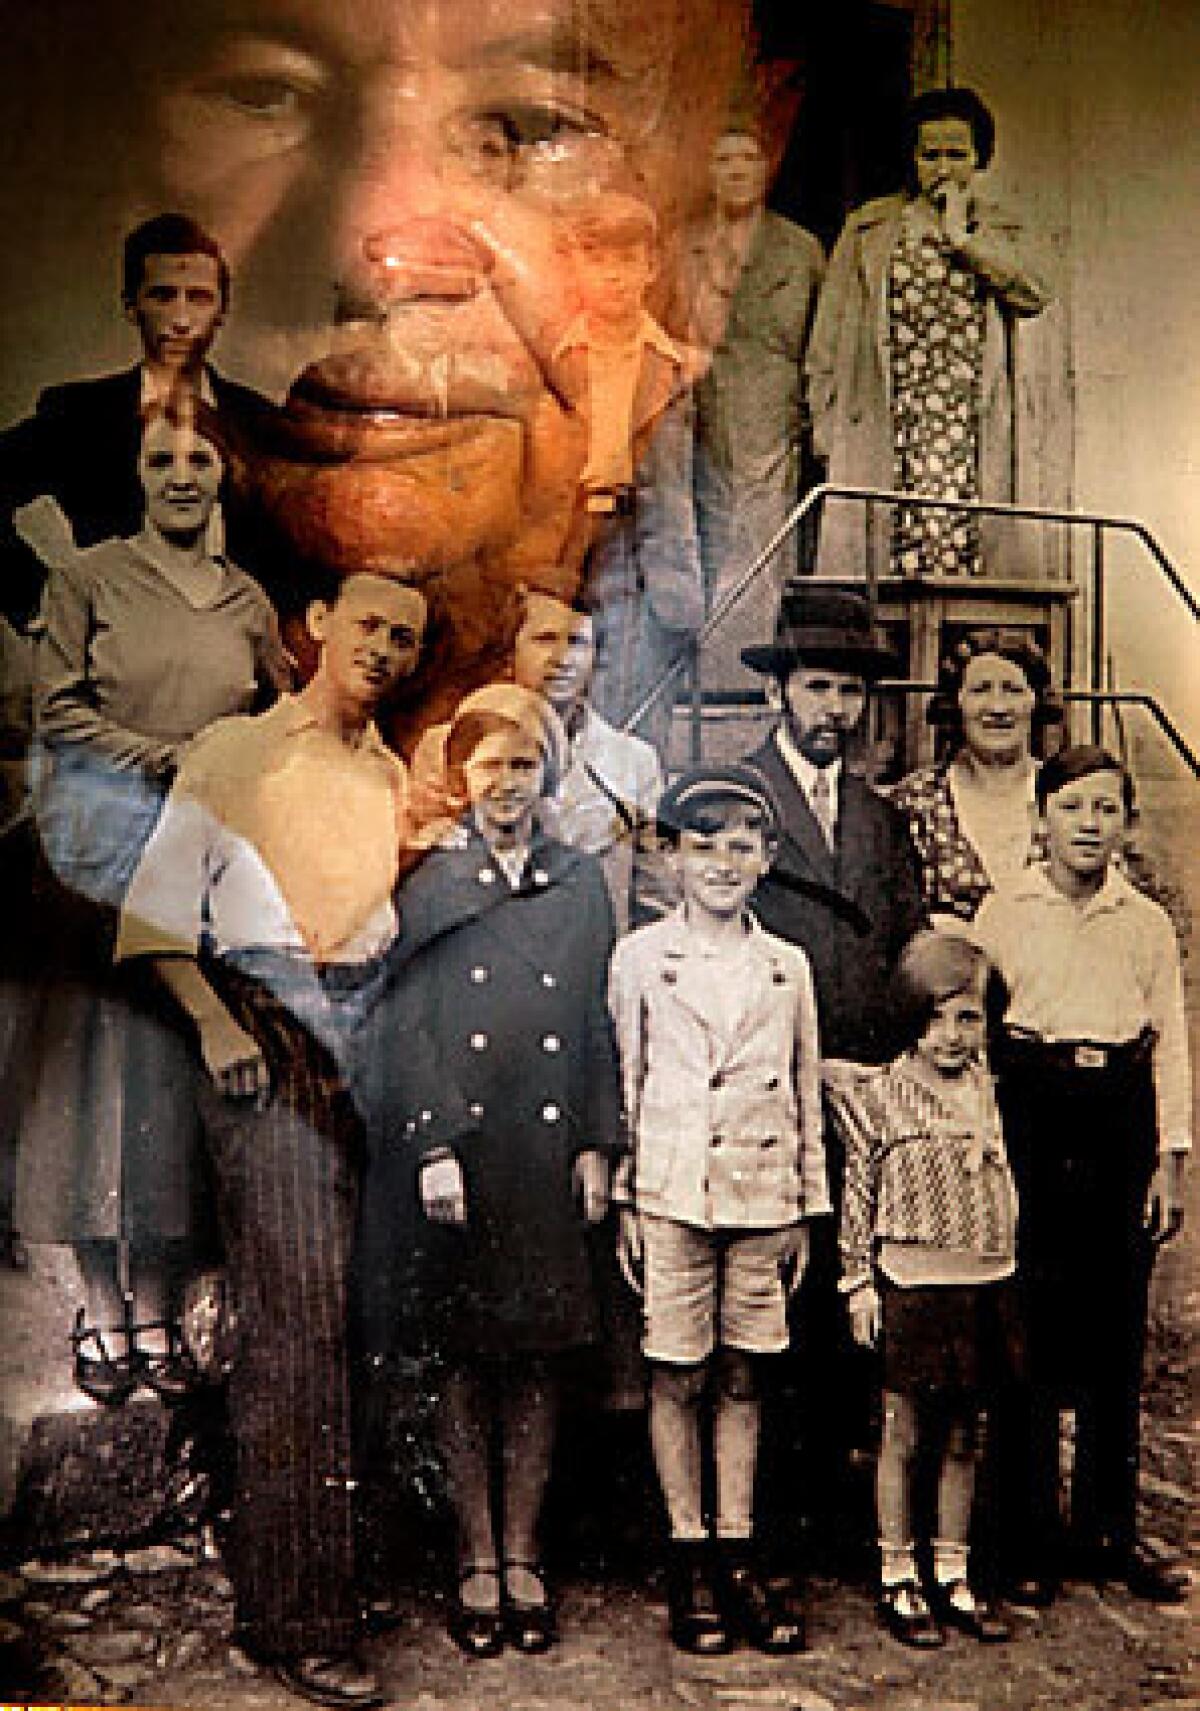 Sol Berger, 88, a Holocaust survivor, is reflected in a family photo, taken when he was a child, living in Krosno, Poland. Berger is third from right in the top row. Berger is visiting Krosno for the first time since World War II.